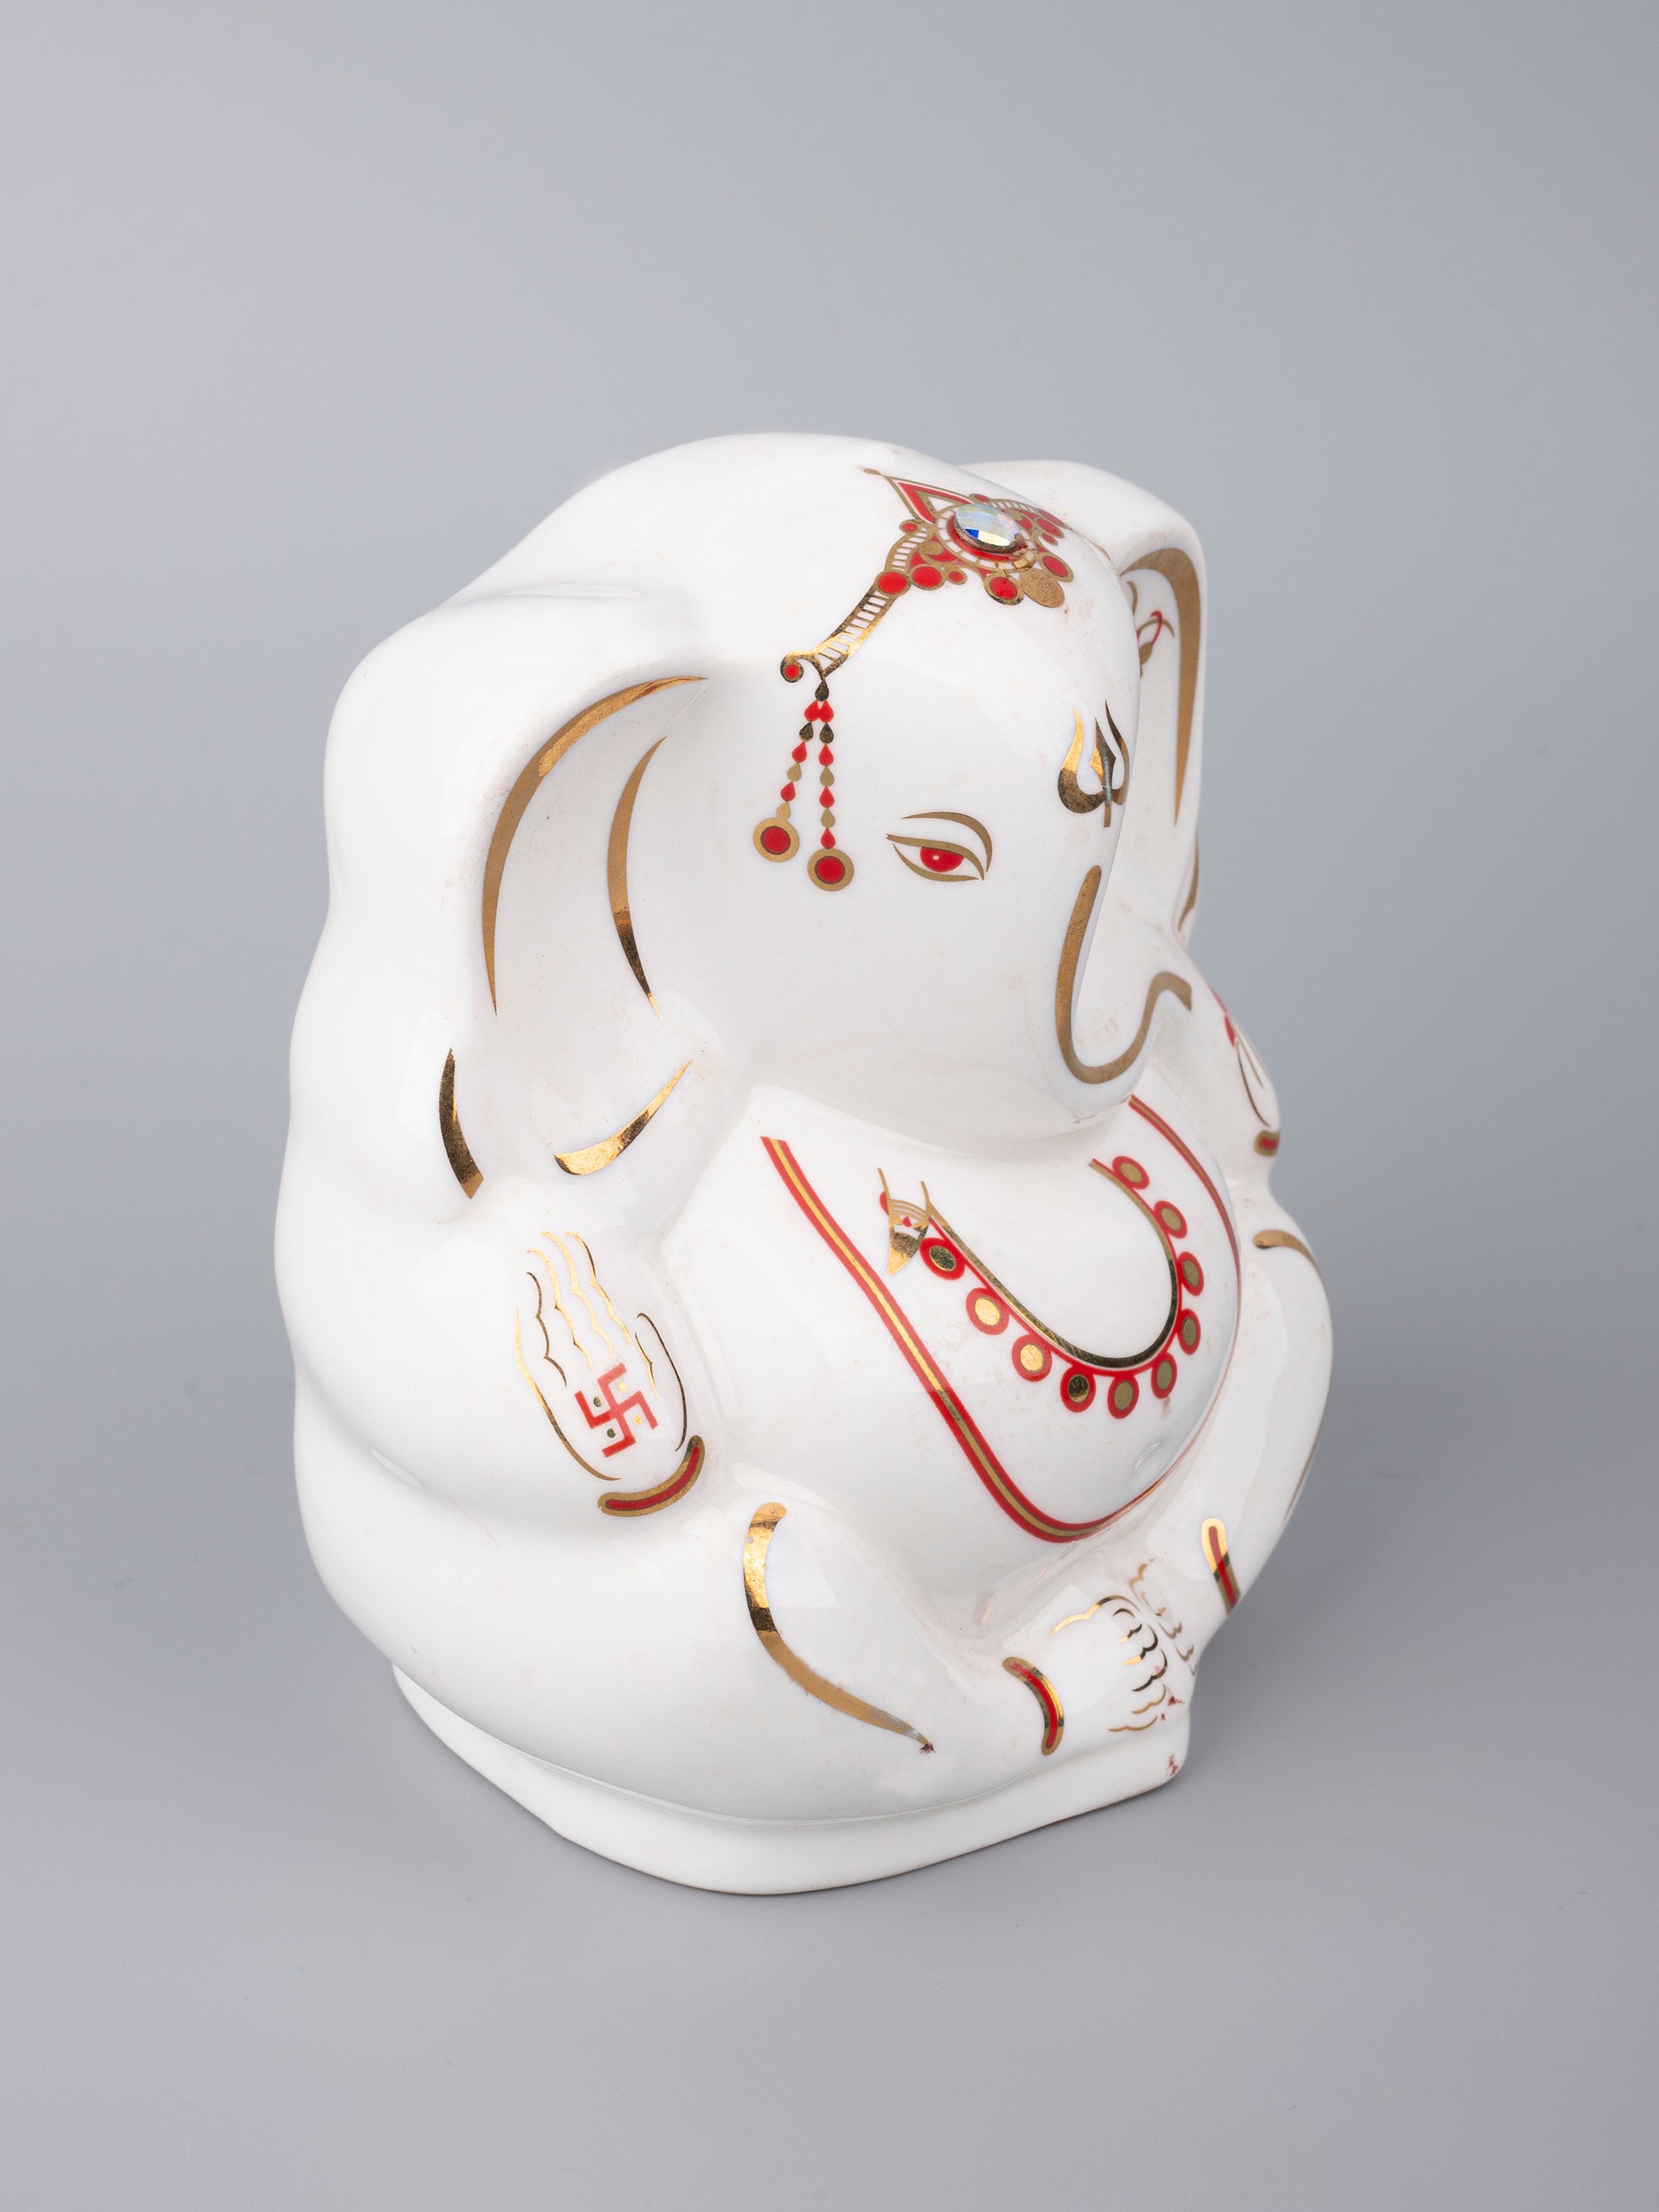 White Ceramic Ganesh Idol with Red Decorations - The Heritage Artifacts